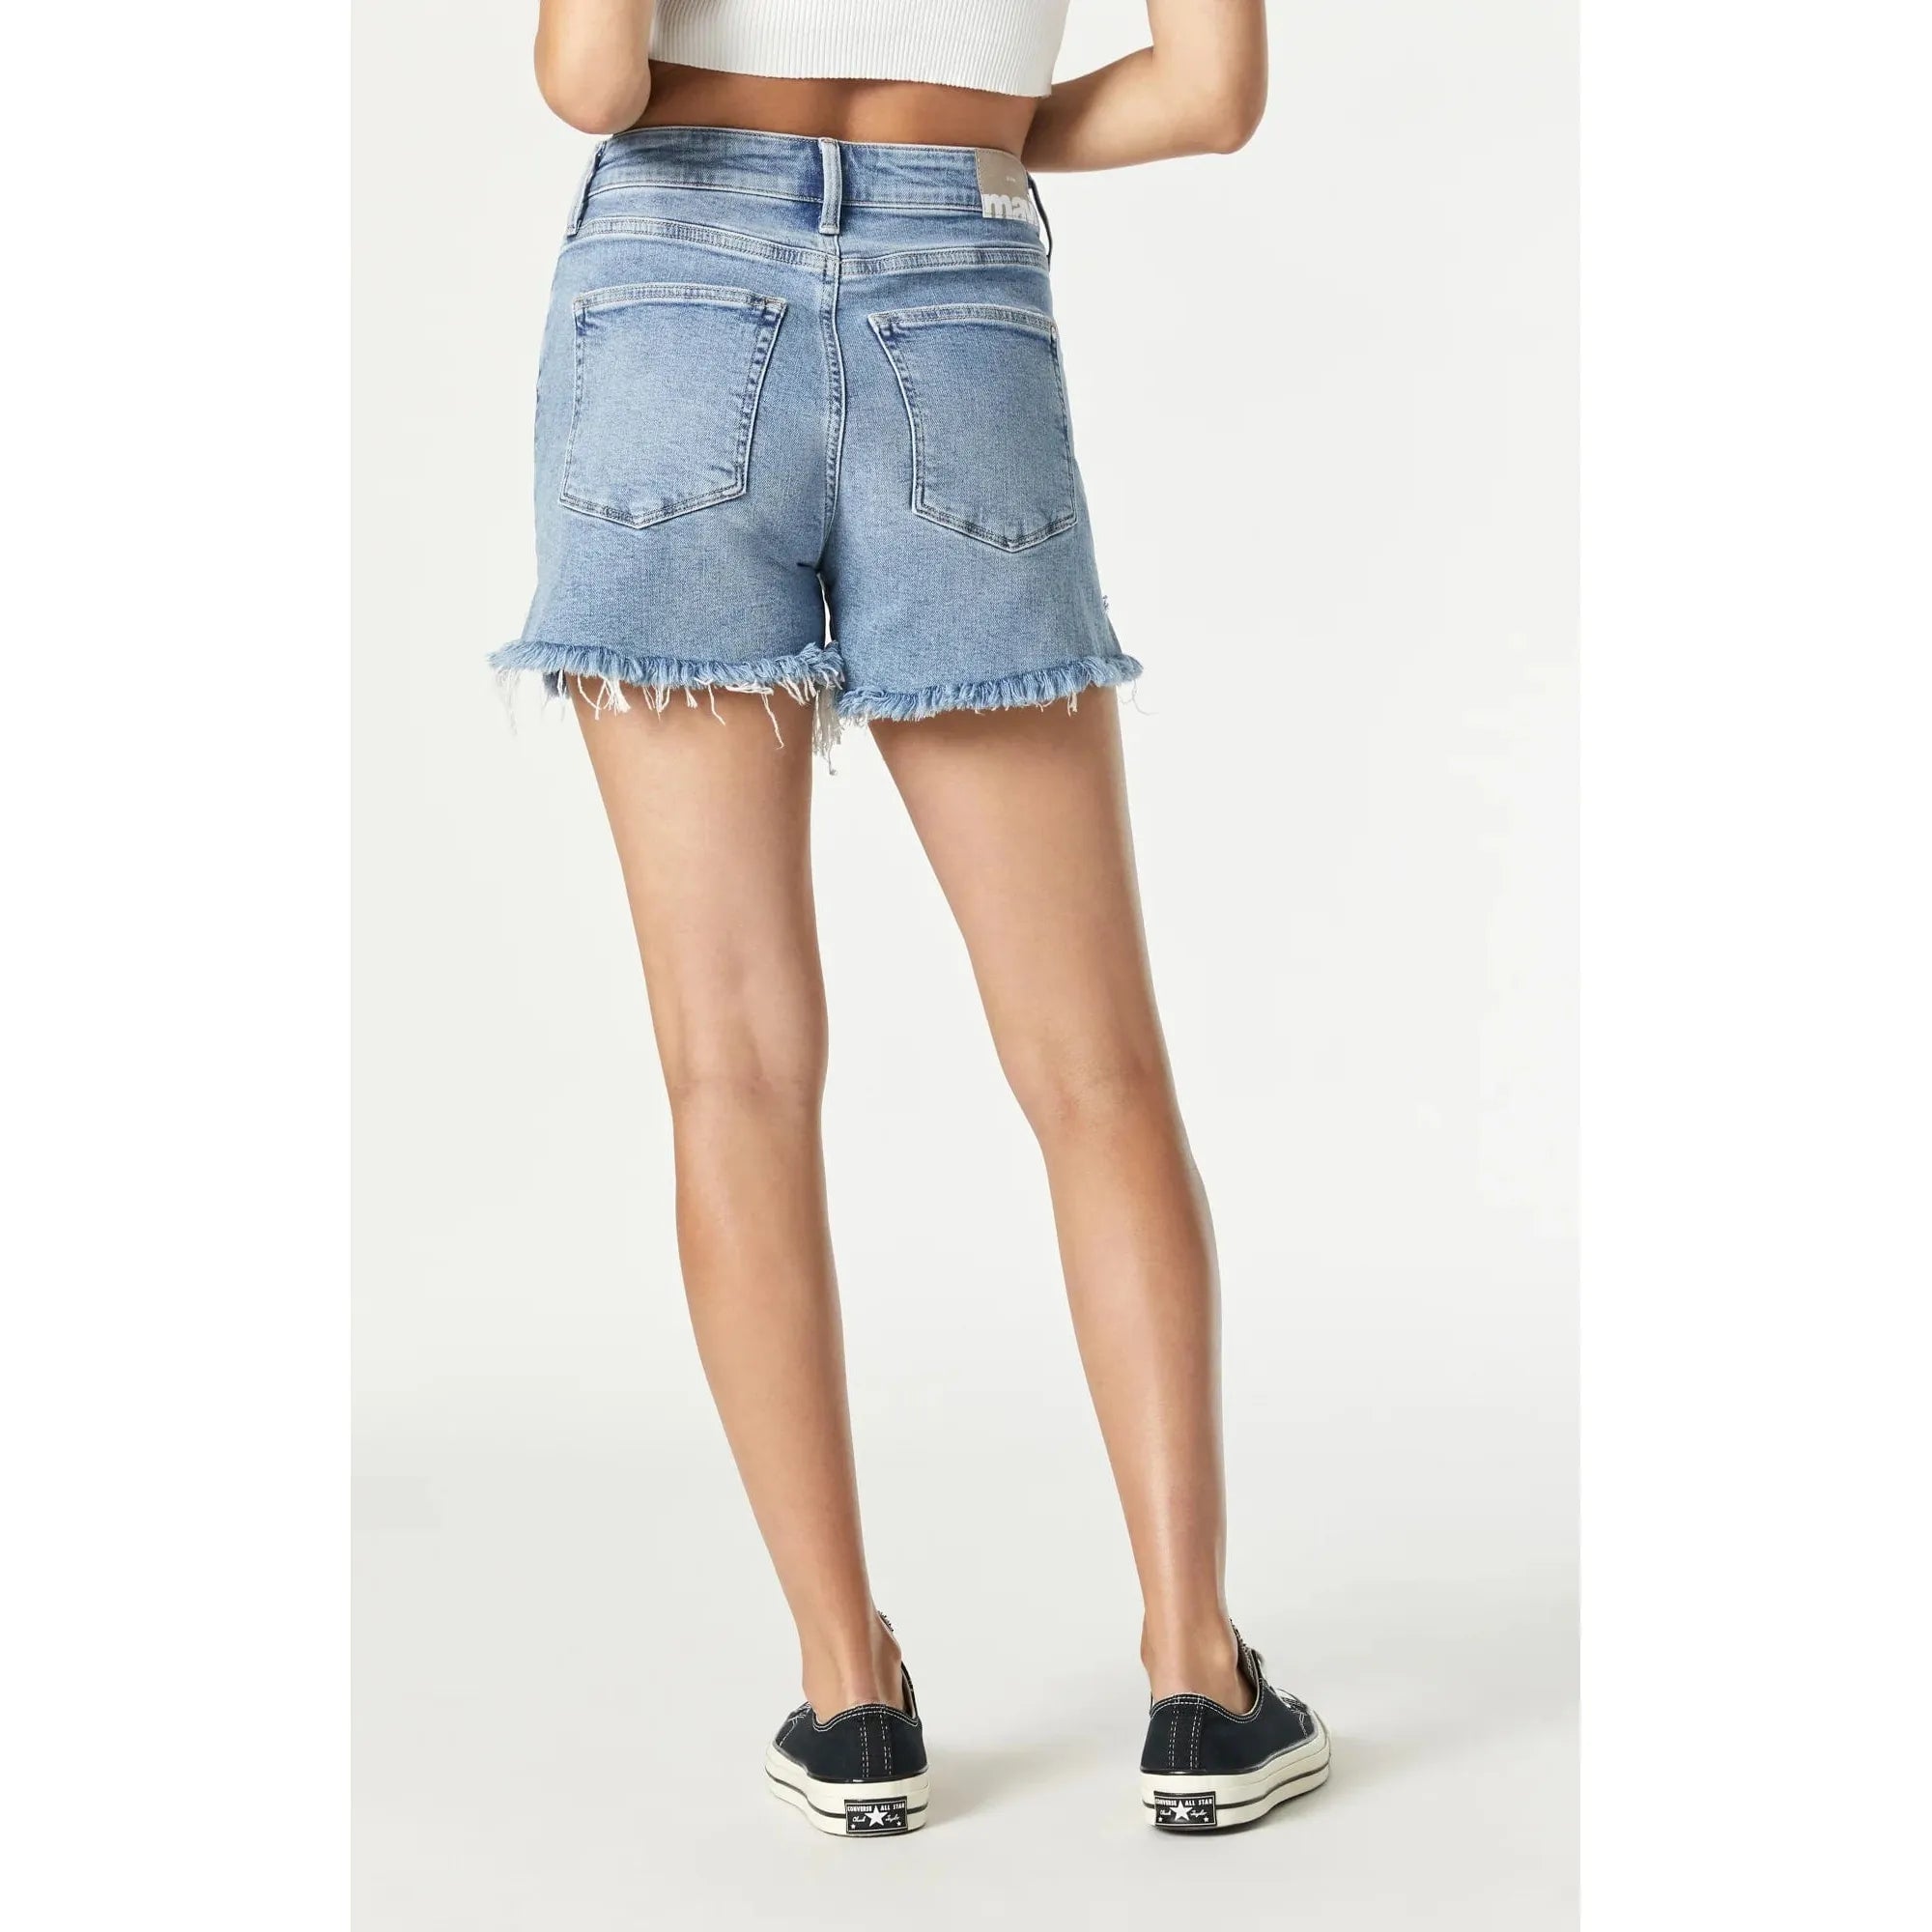 Mavi Jeans Heidi Bleached Ripped Recycle Blue Shorts